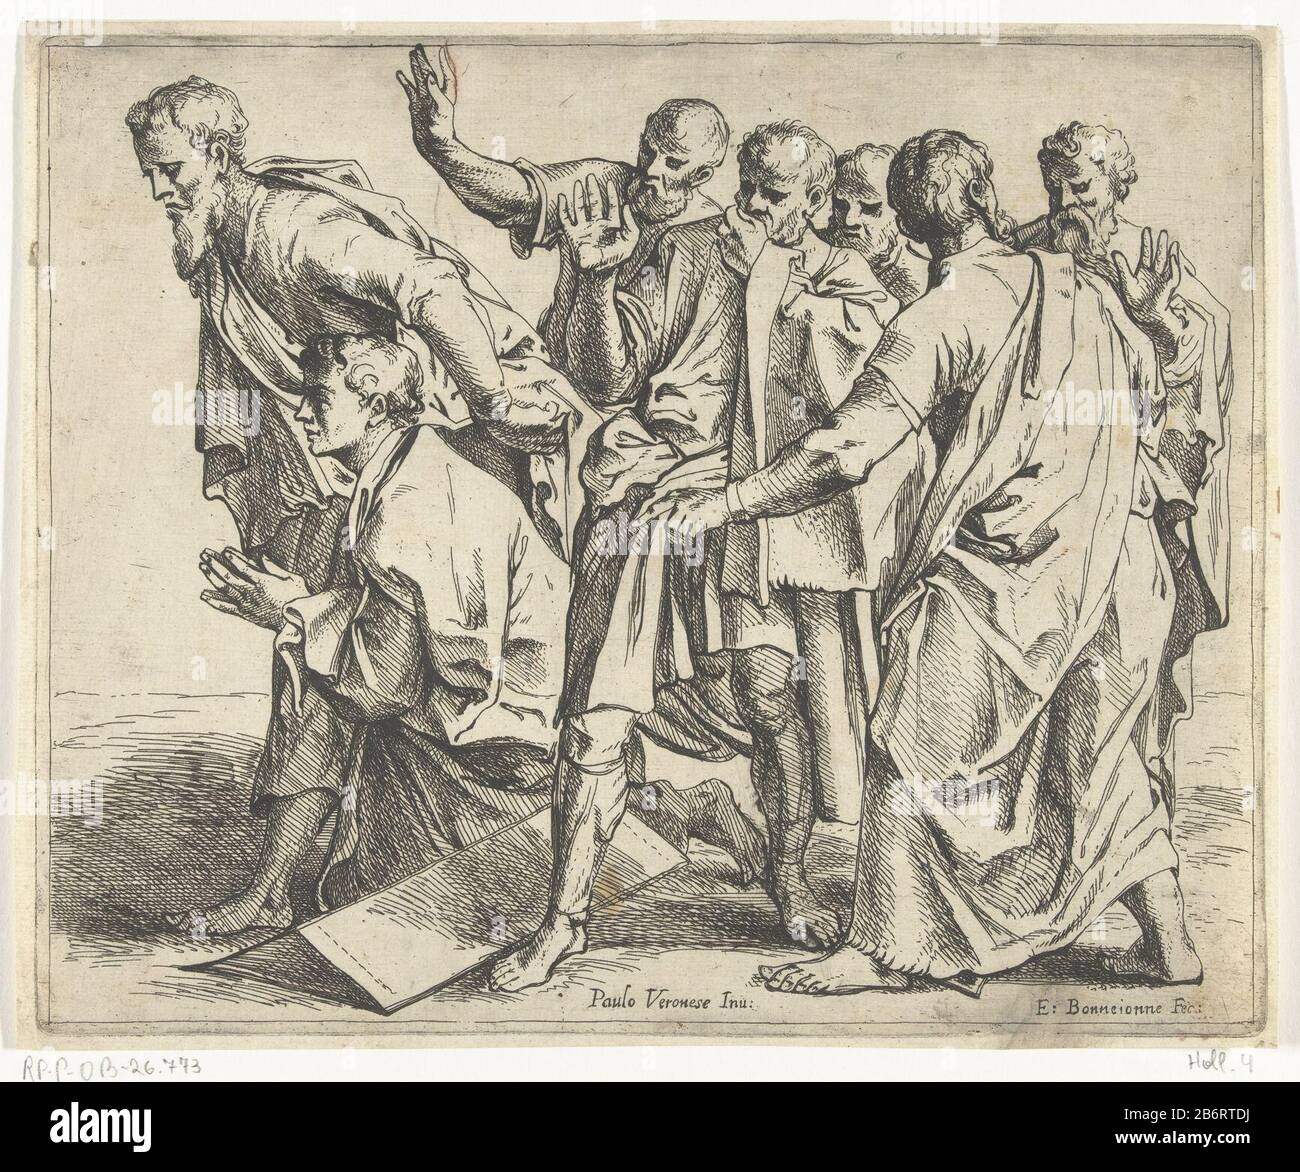 Groep mannen Seven men, possibly apostles, look to the left. They look shocked. One of the men (John) falls to his knees and bidt. Manufacturer : printmaker Eloy Bonn Jonne (listed building), designed by Paolo Veronese (listed property) Date: ca. 1640 - 1695 Physical features: etching material: paper Technique : etching dimensions: plate edge b 246 mm × h 202 mm Subject: Incredulityhuman races; peoples; nationalities (+ one) Surprise, Wonder; 'Maraviglia '(Ripa) Stock Photo